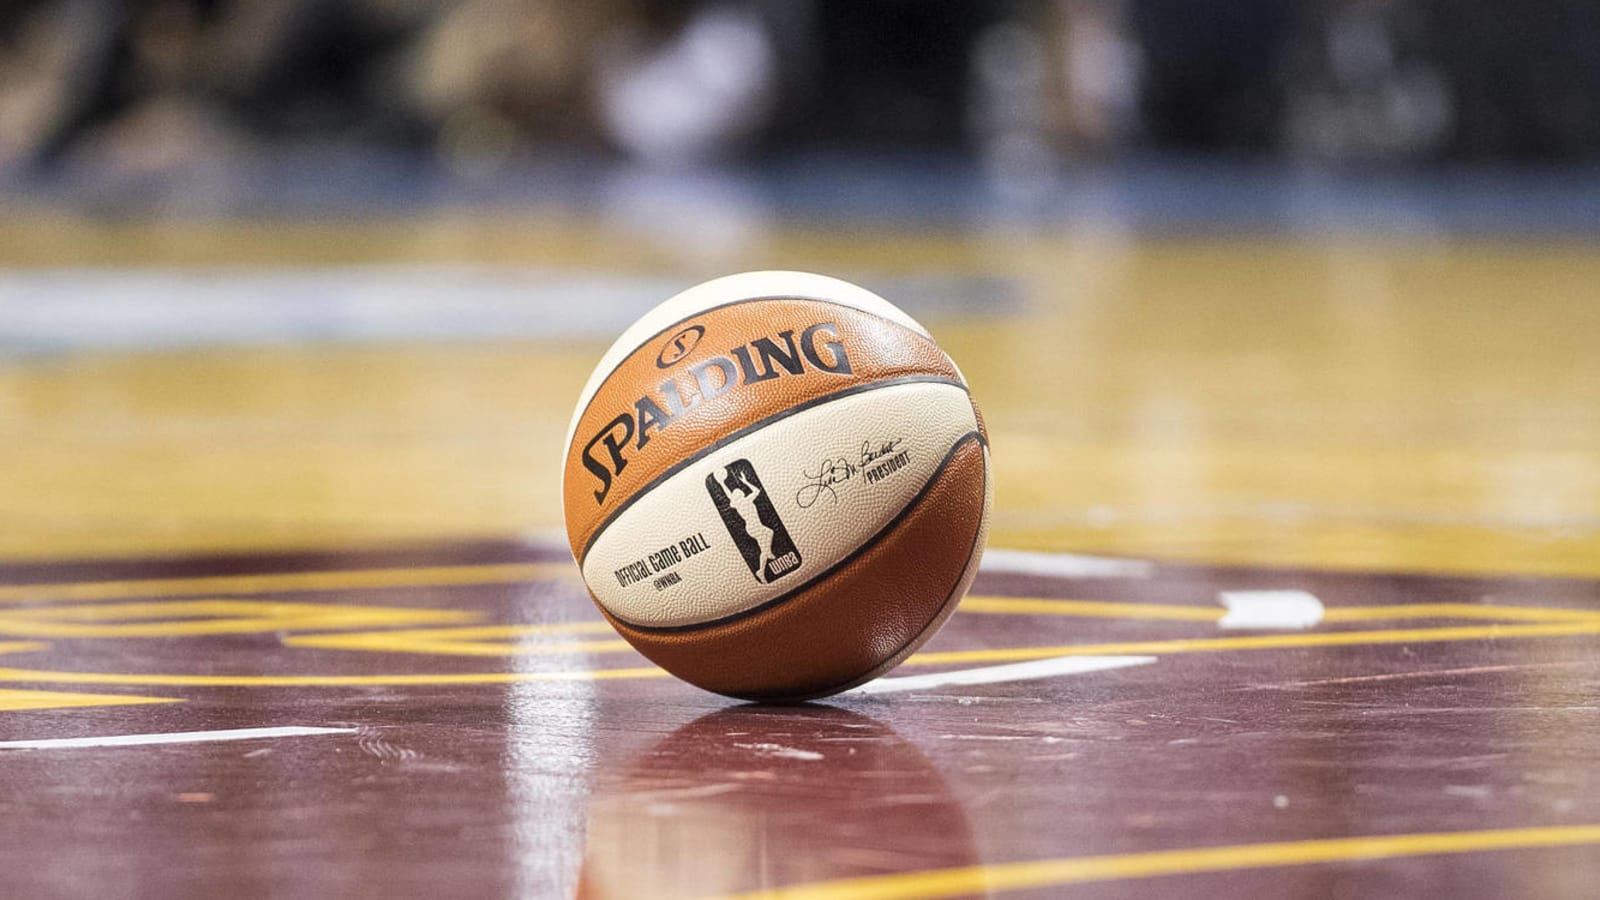 WNBA season begins May 14 in home arenas, concludes Sept. 19